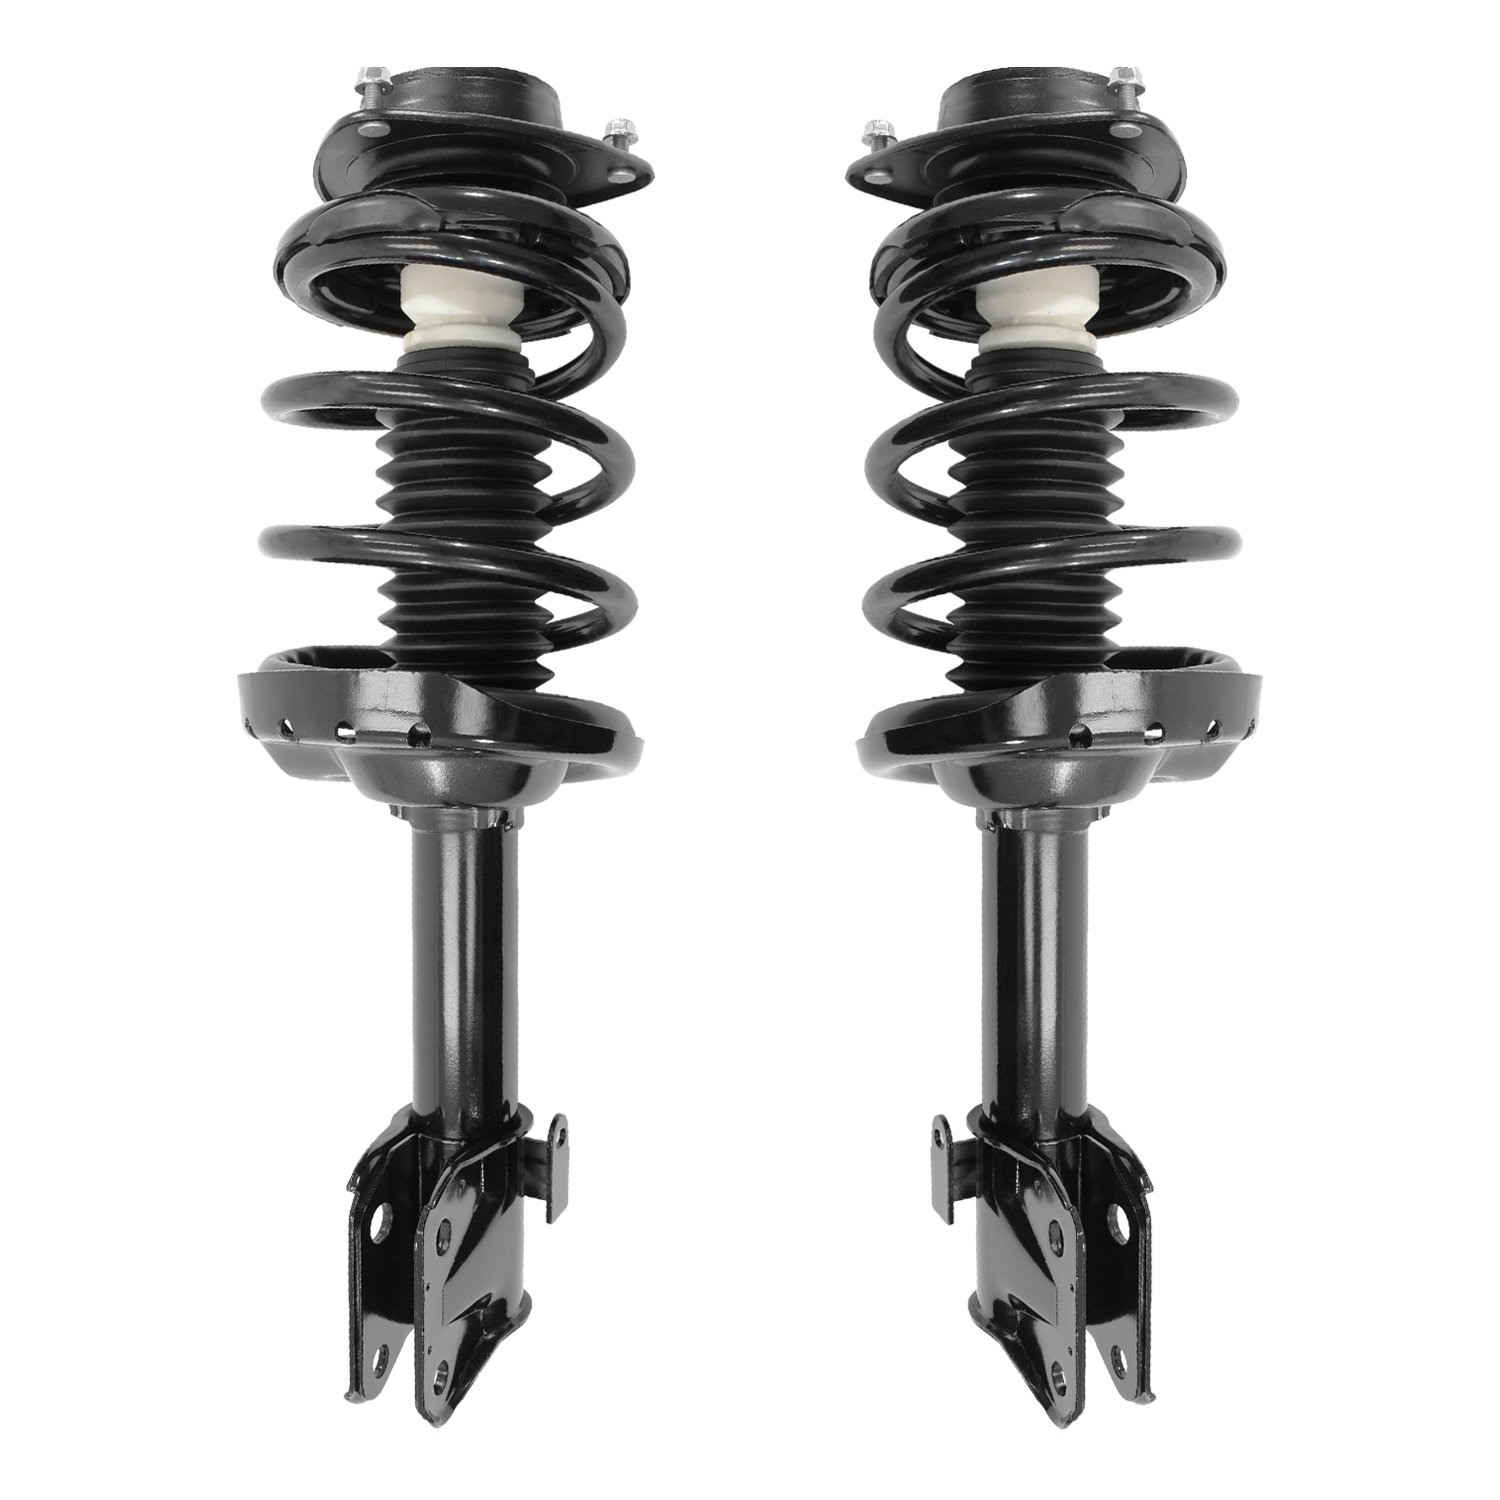 2-11917-11918-001 Front Suspension Strut & Coil Spring Assemby Set Fits Select Subaru Forester